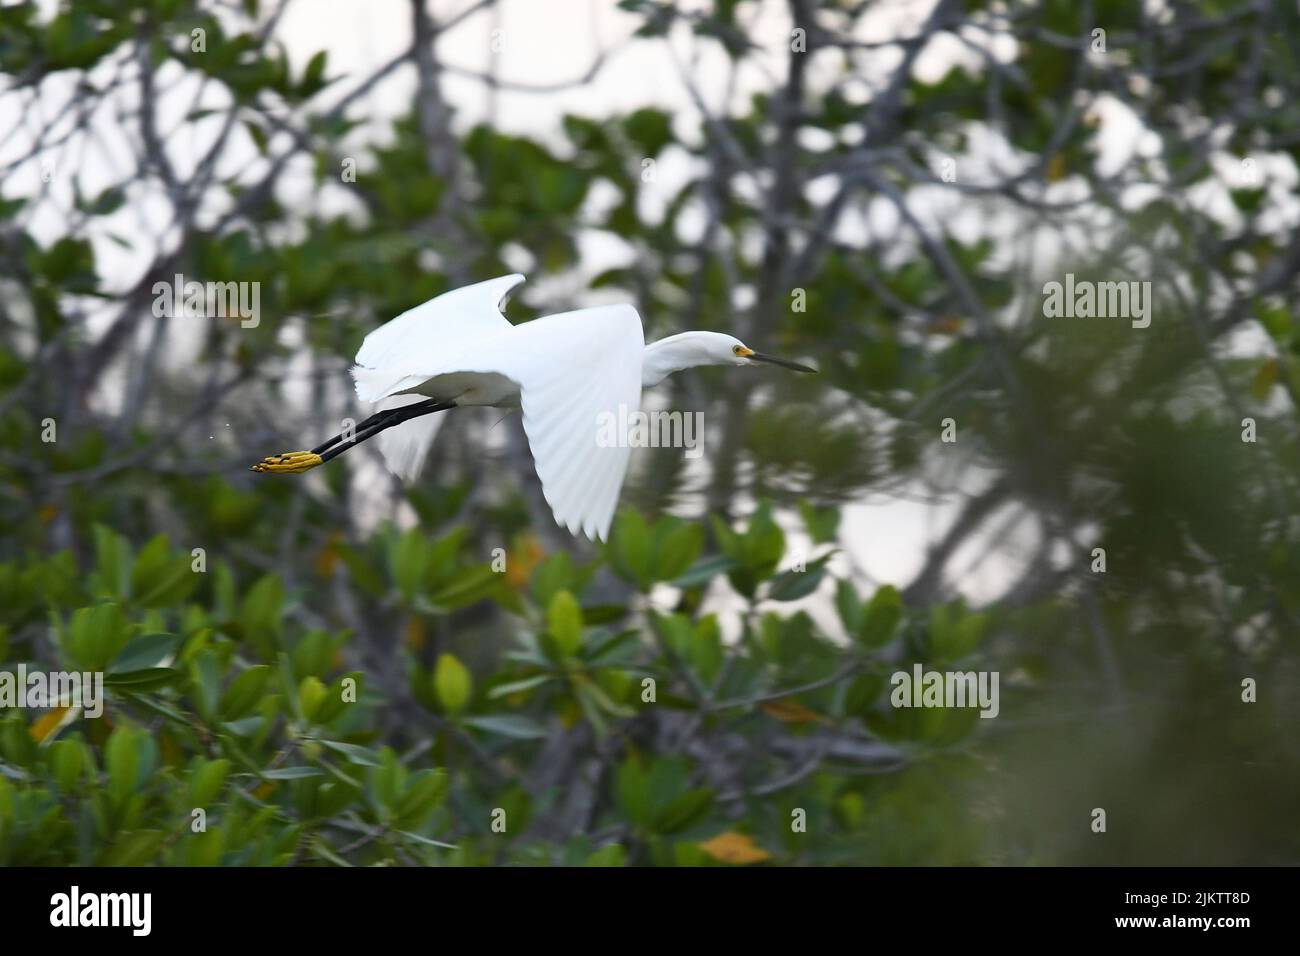 A closeup shot of a little egret in flight on a green background Stock Photo